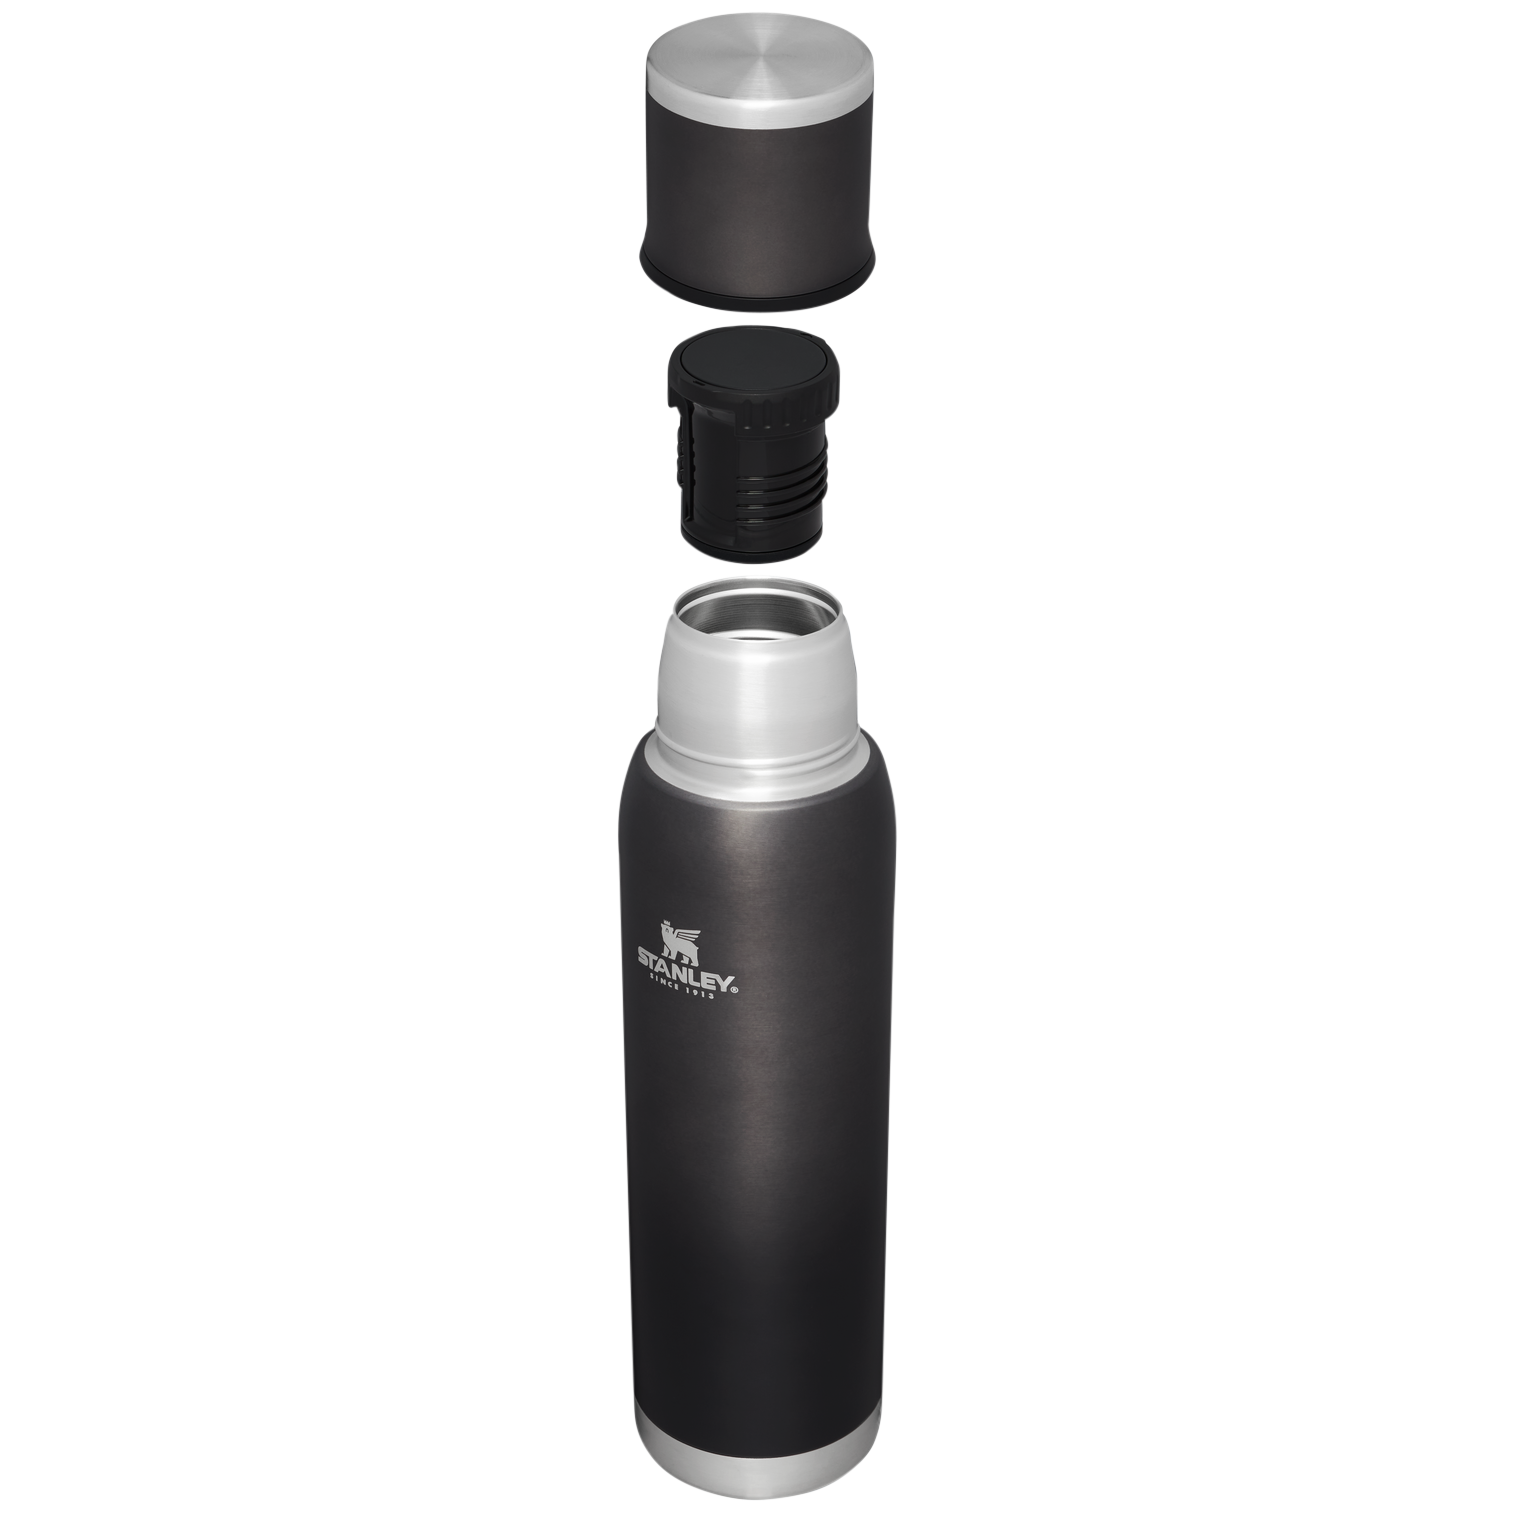 Stanley Adventure Stainless Steel Vacuum Bottle - 1.4 qt. - Crazy Gray Ghost